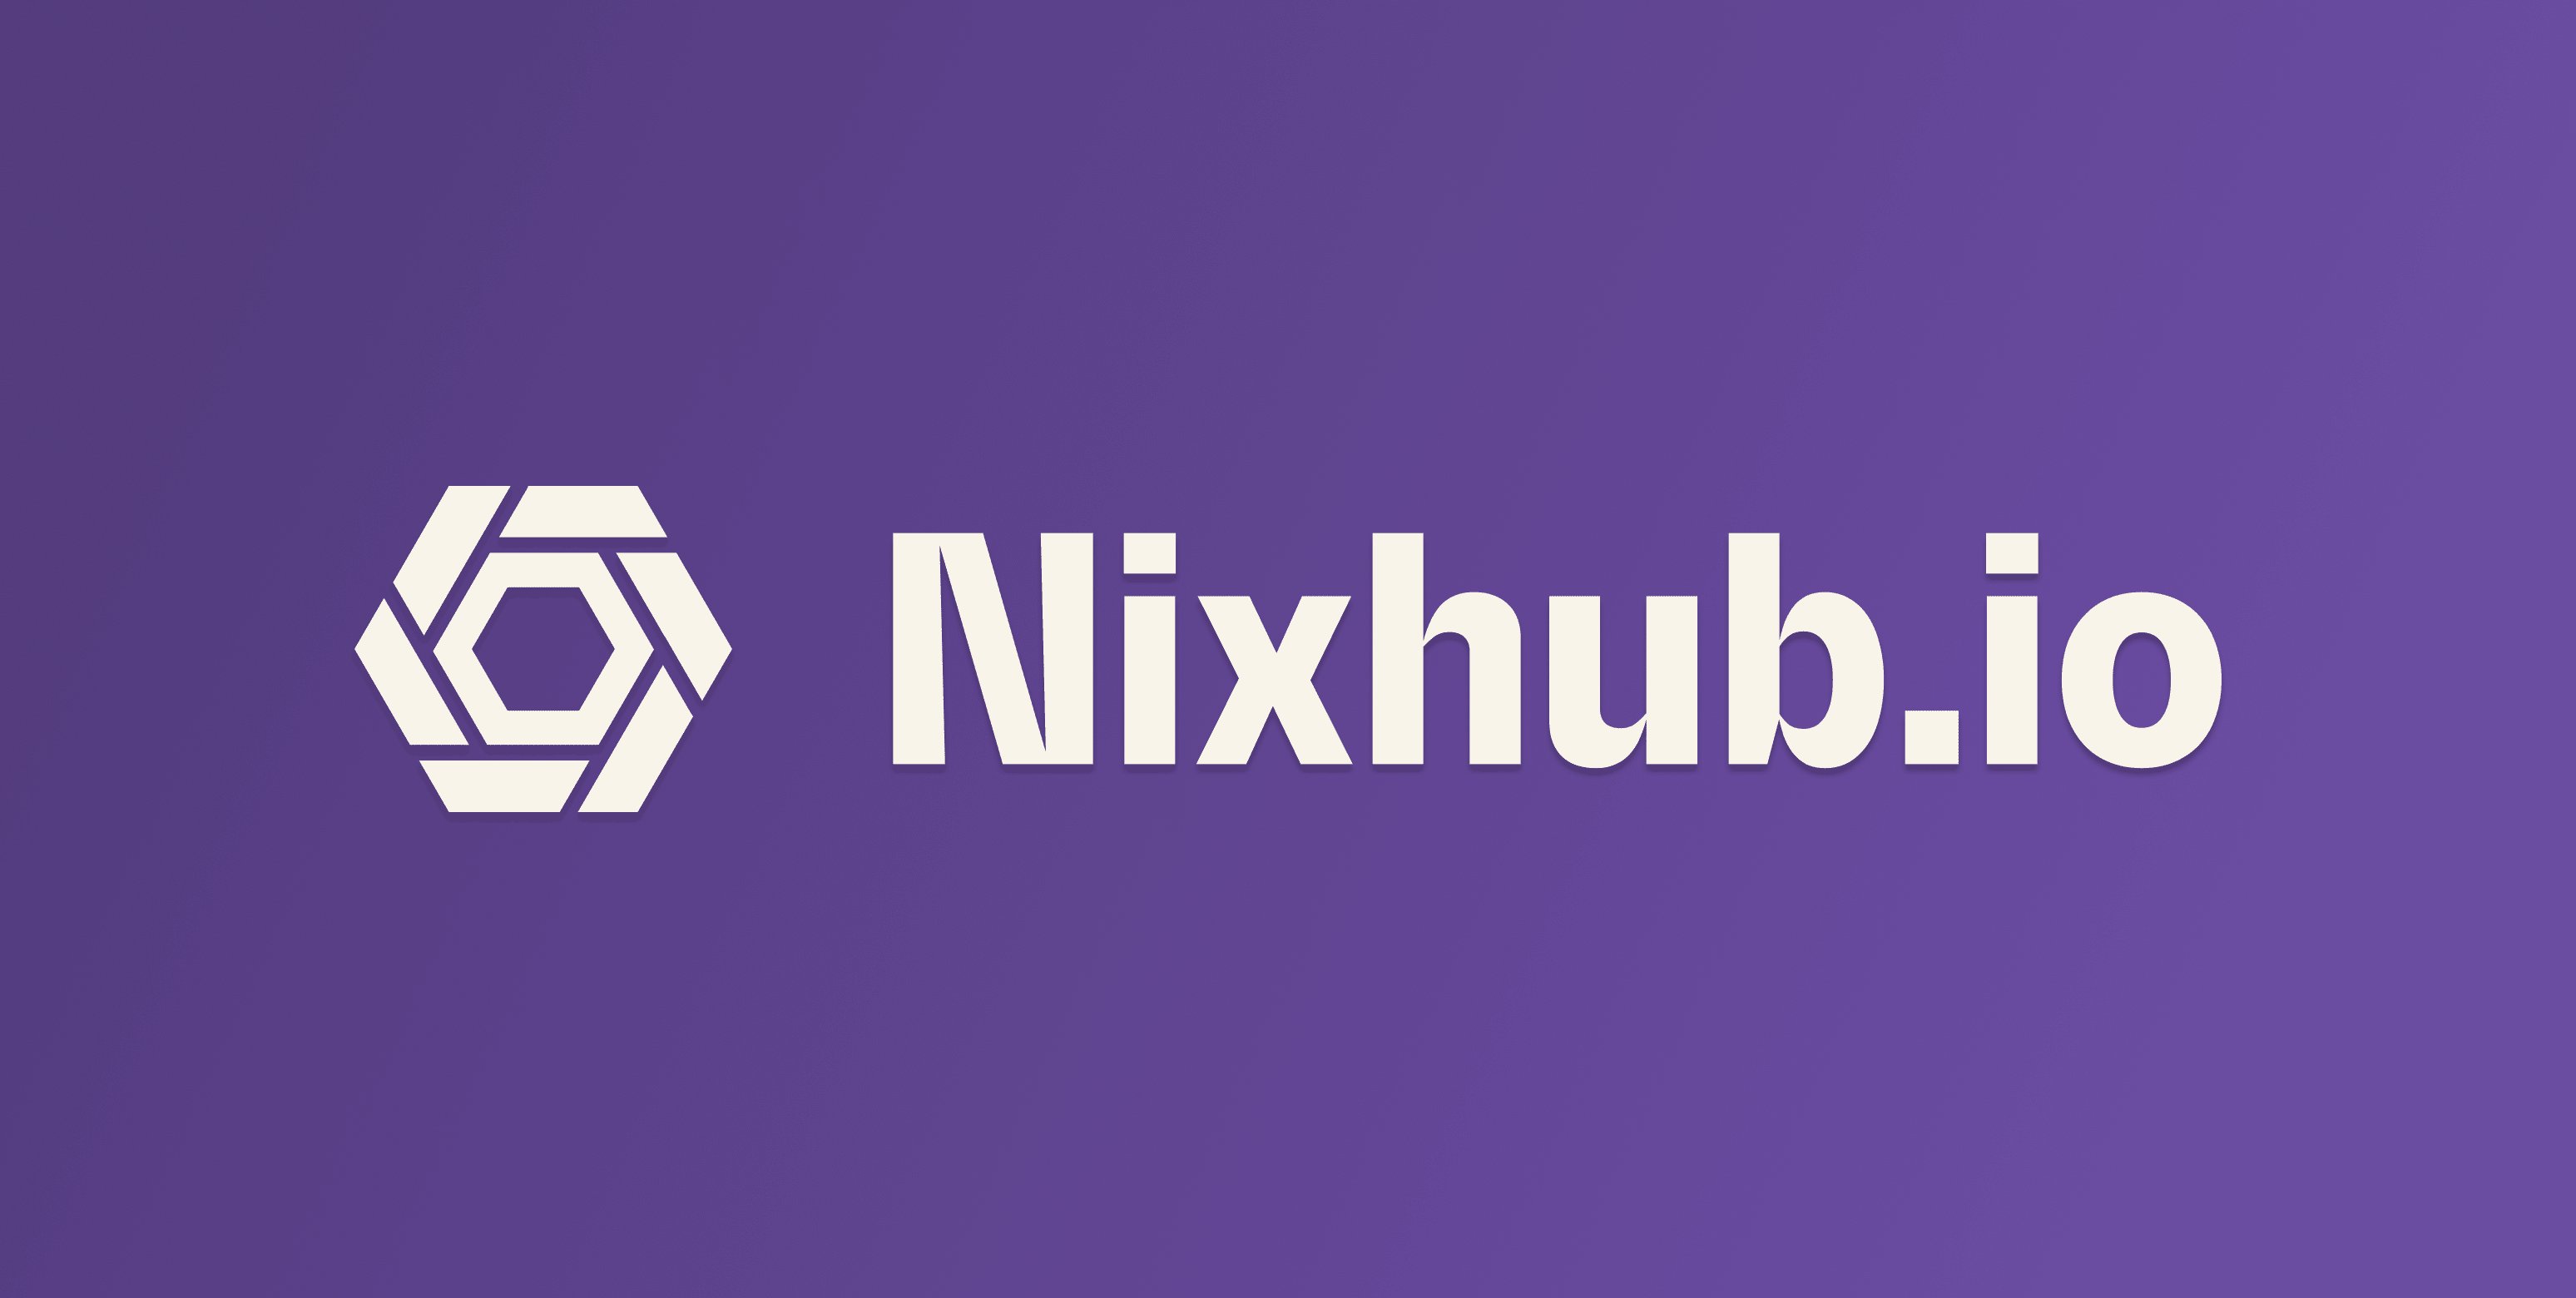 Introducing Nixhub: Search Historical Versions of Nix Packages